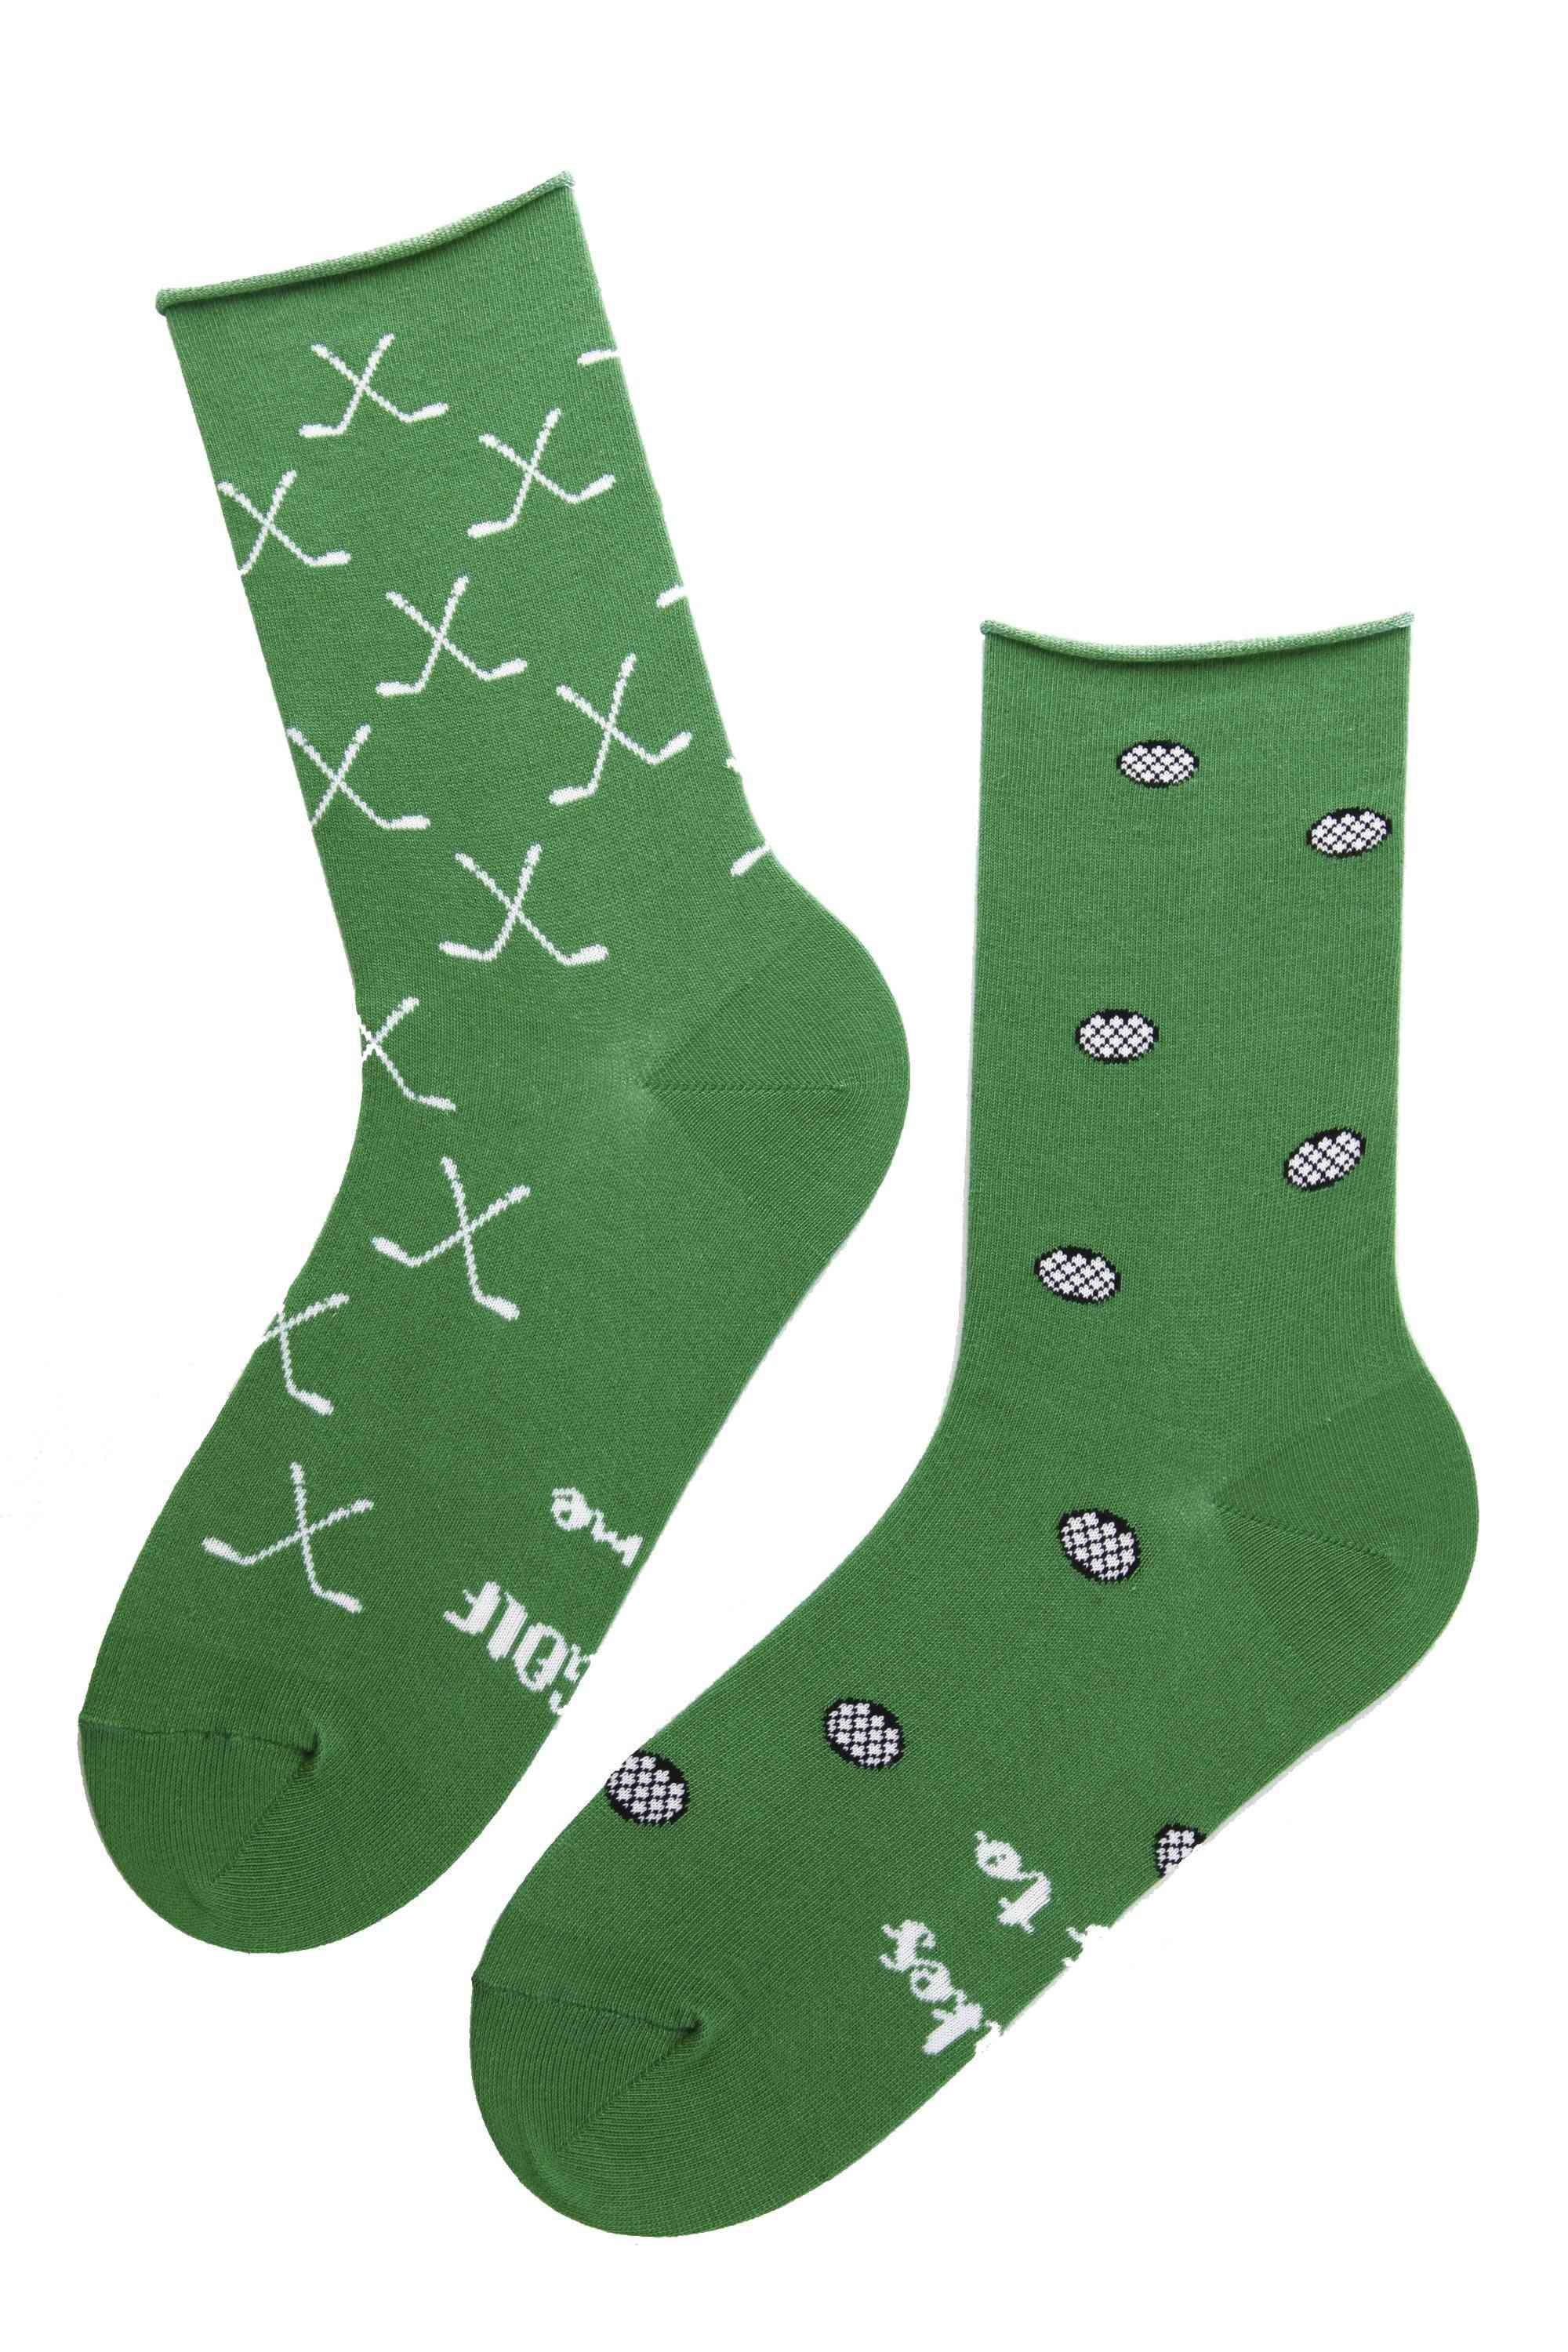 Golf Club And Ball Pattern Cotton Socks For Women